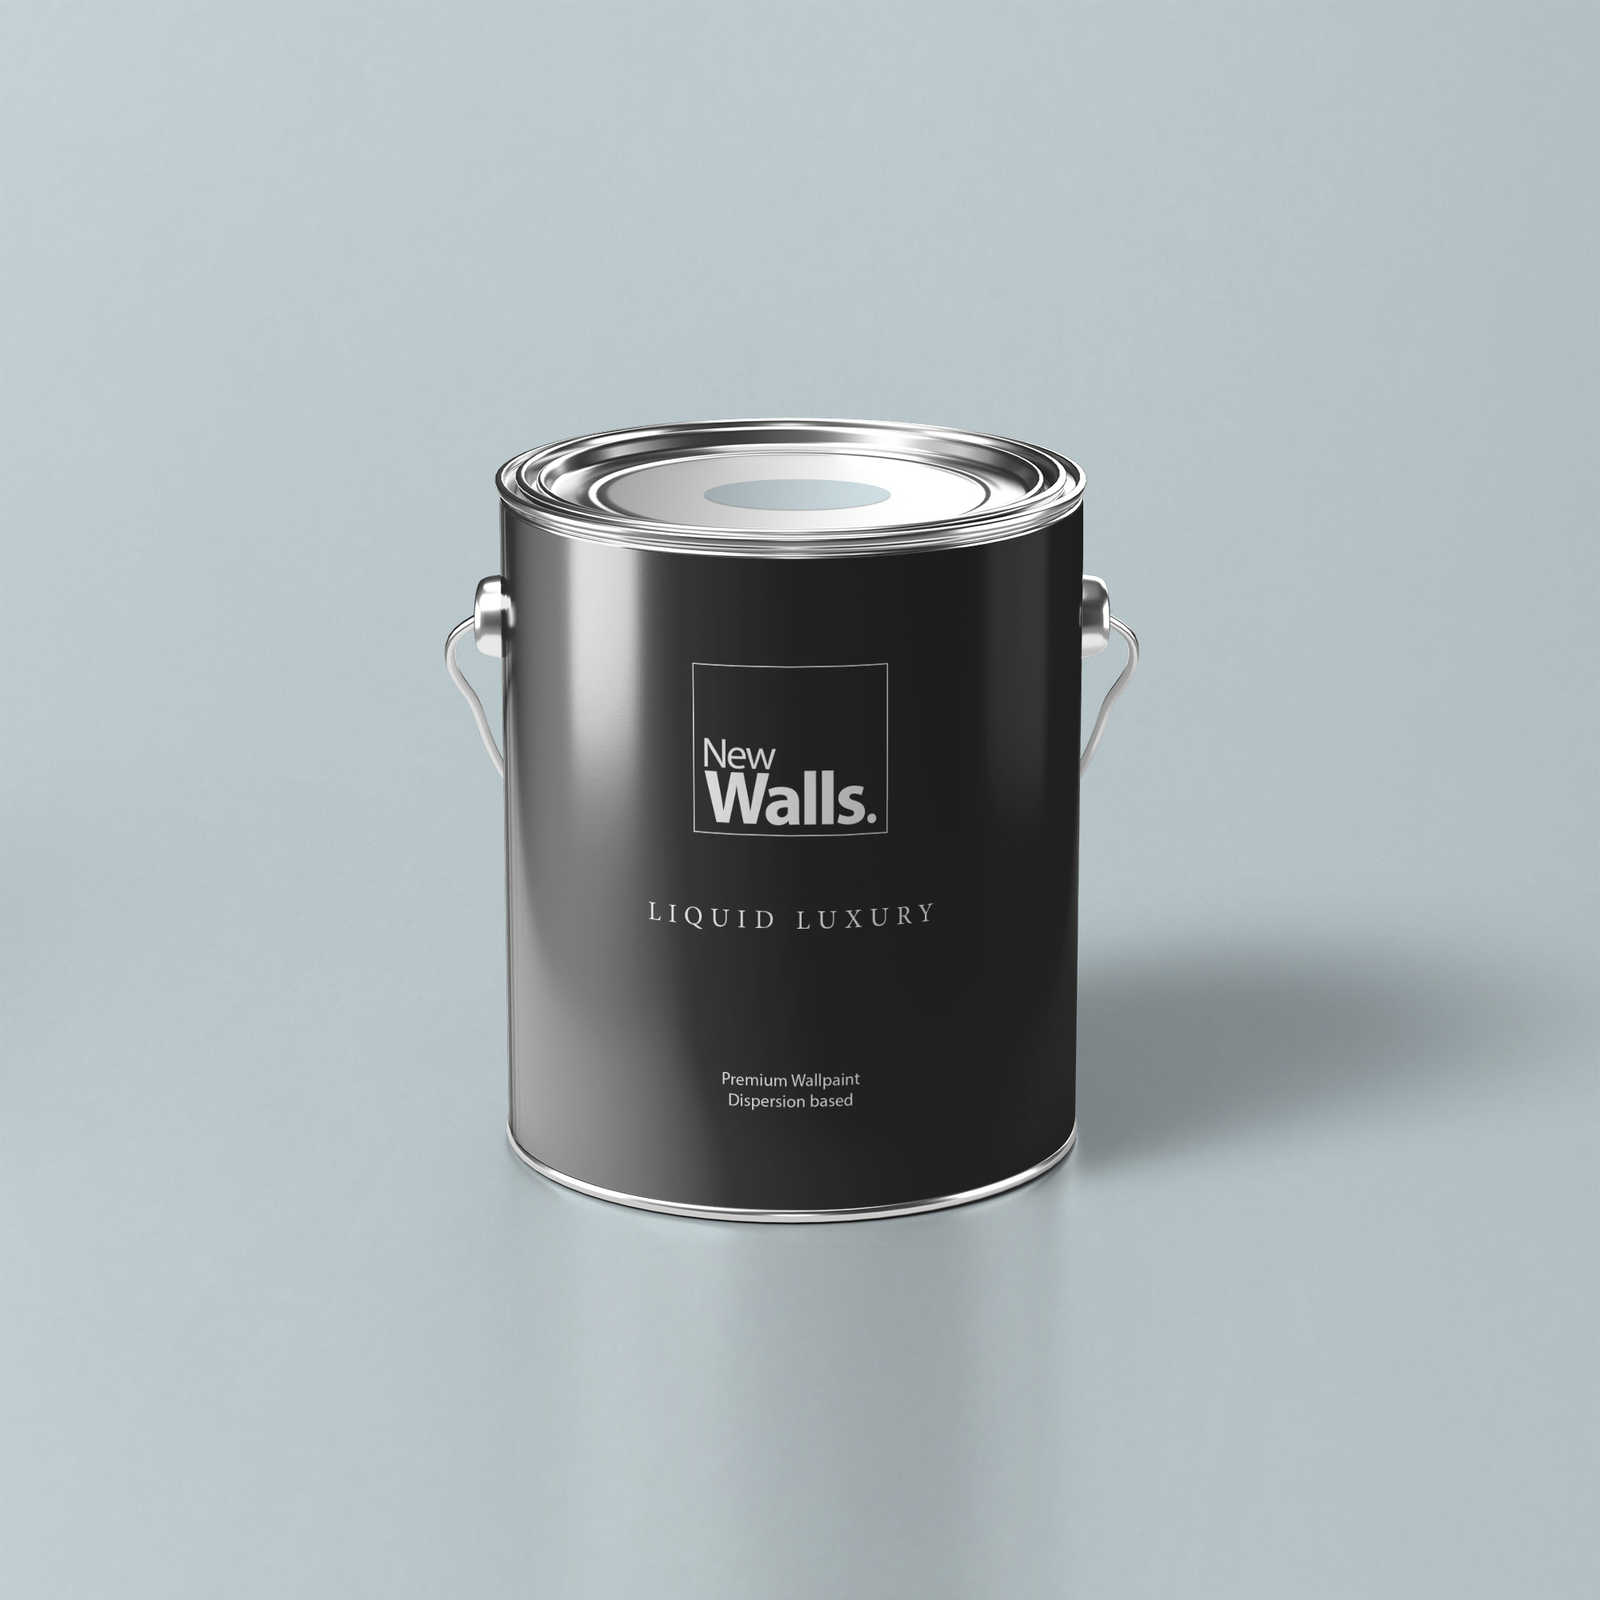 Premium Wall Paint Heavenly Blue Grey »Blissful Blue« NW300 – 5 litre
